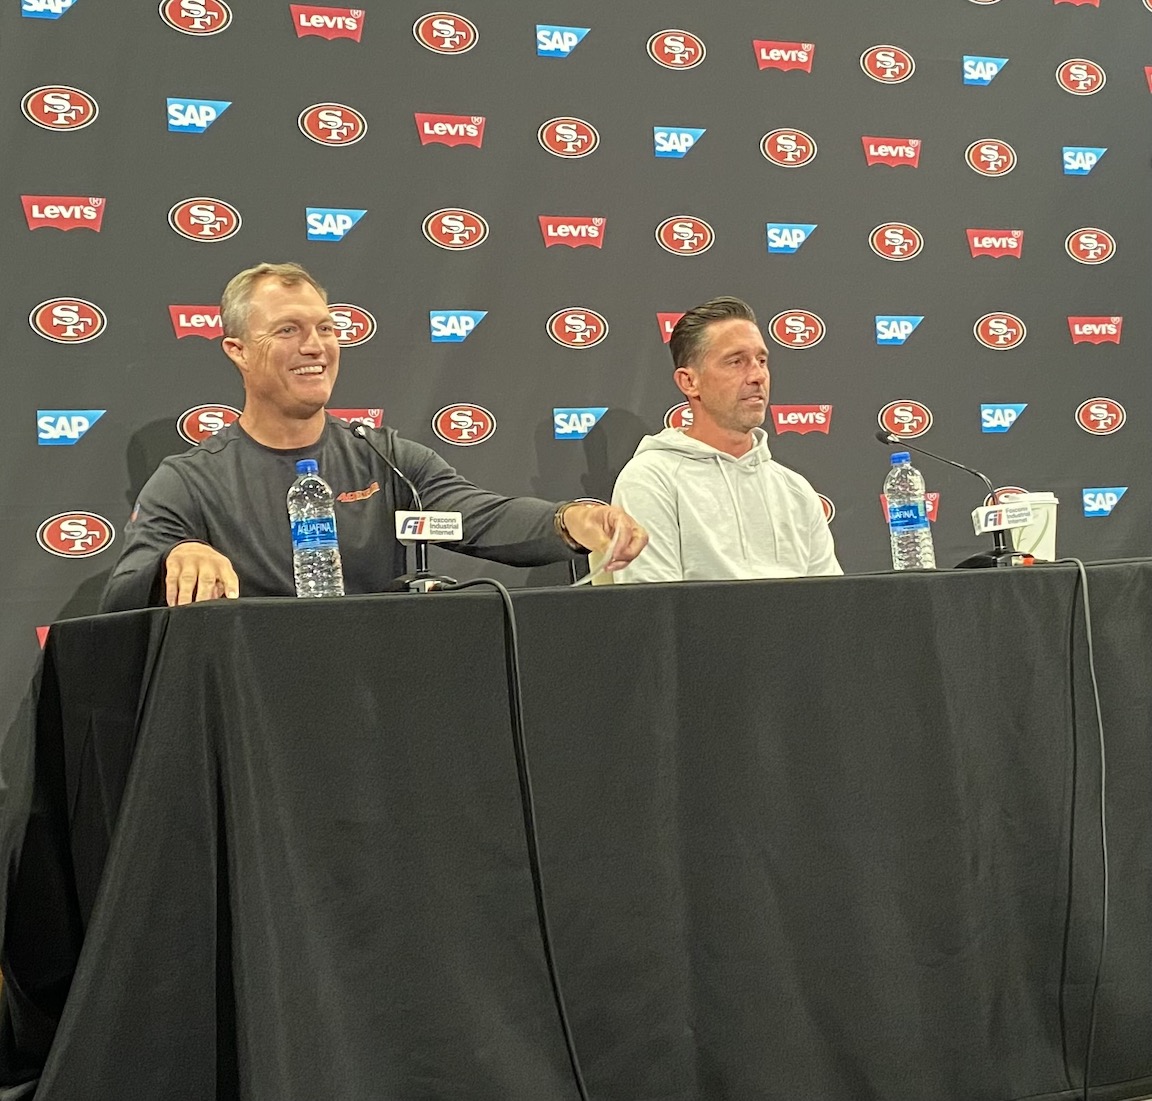 On 49ers: “No Open Competition.” Jimmy Garoppolo is QB1, Nick Bosa, Dee Ford and More